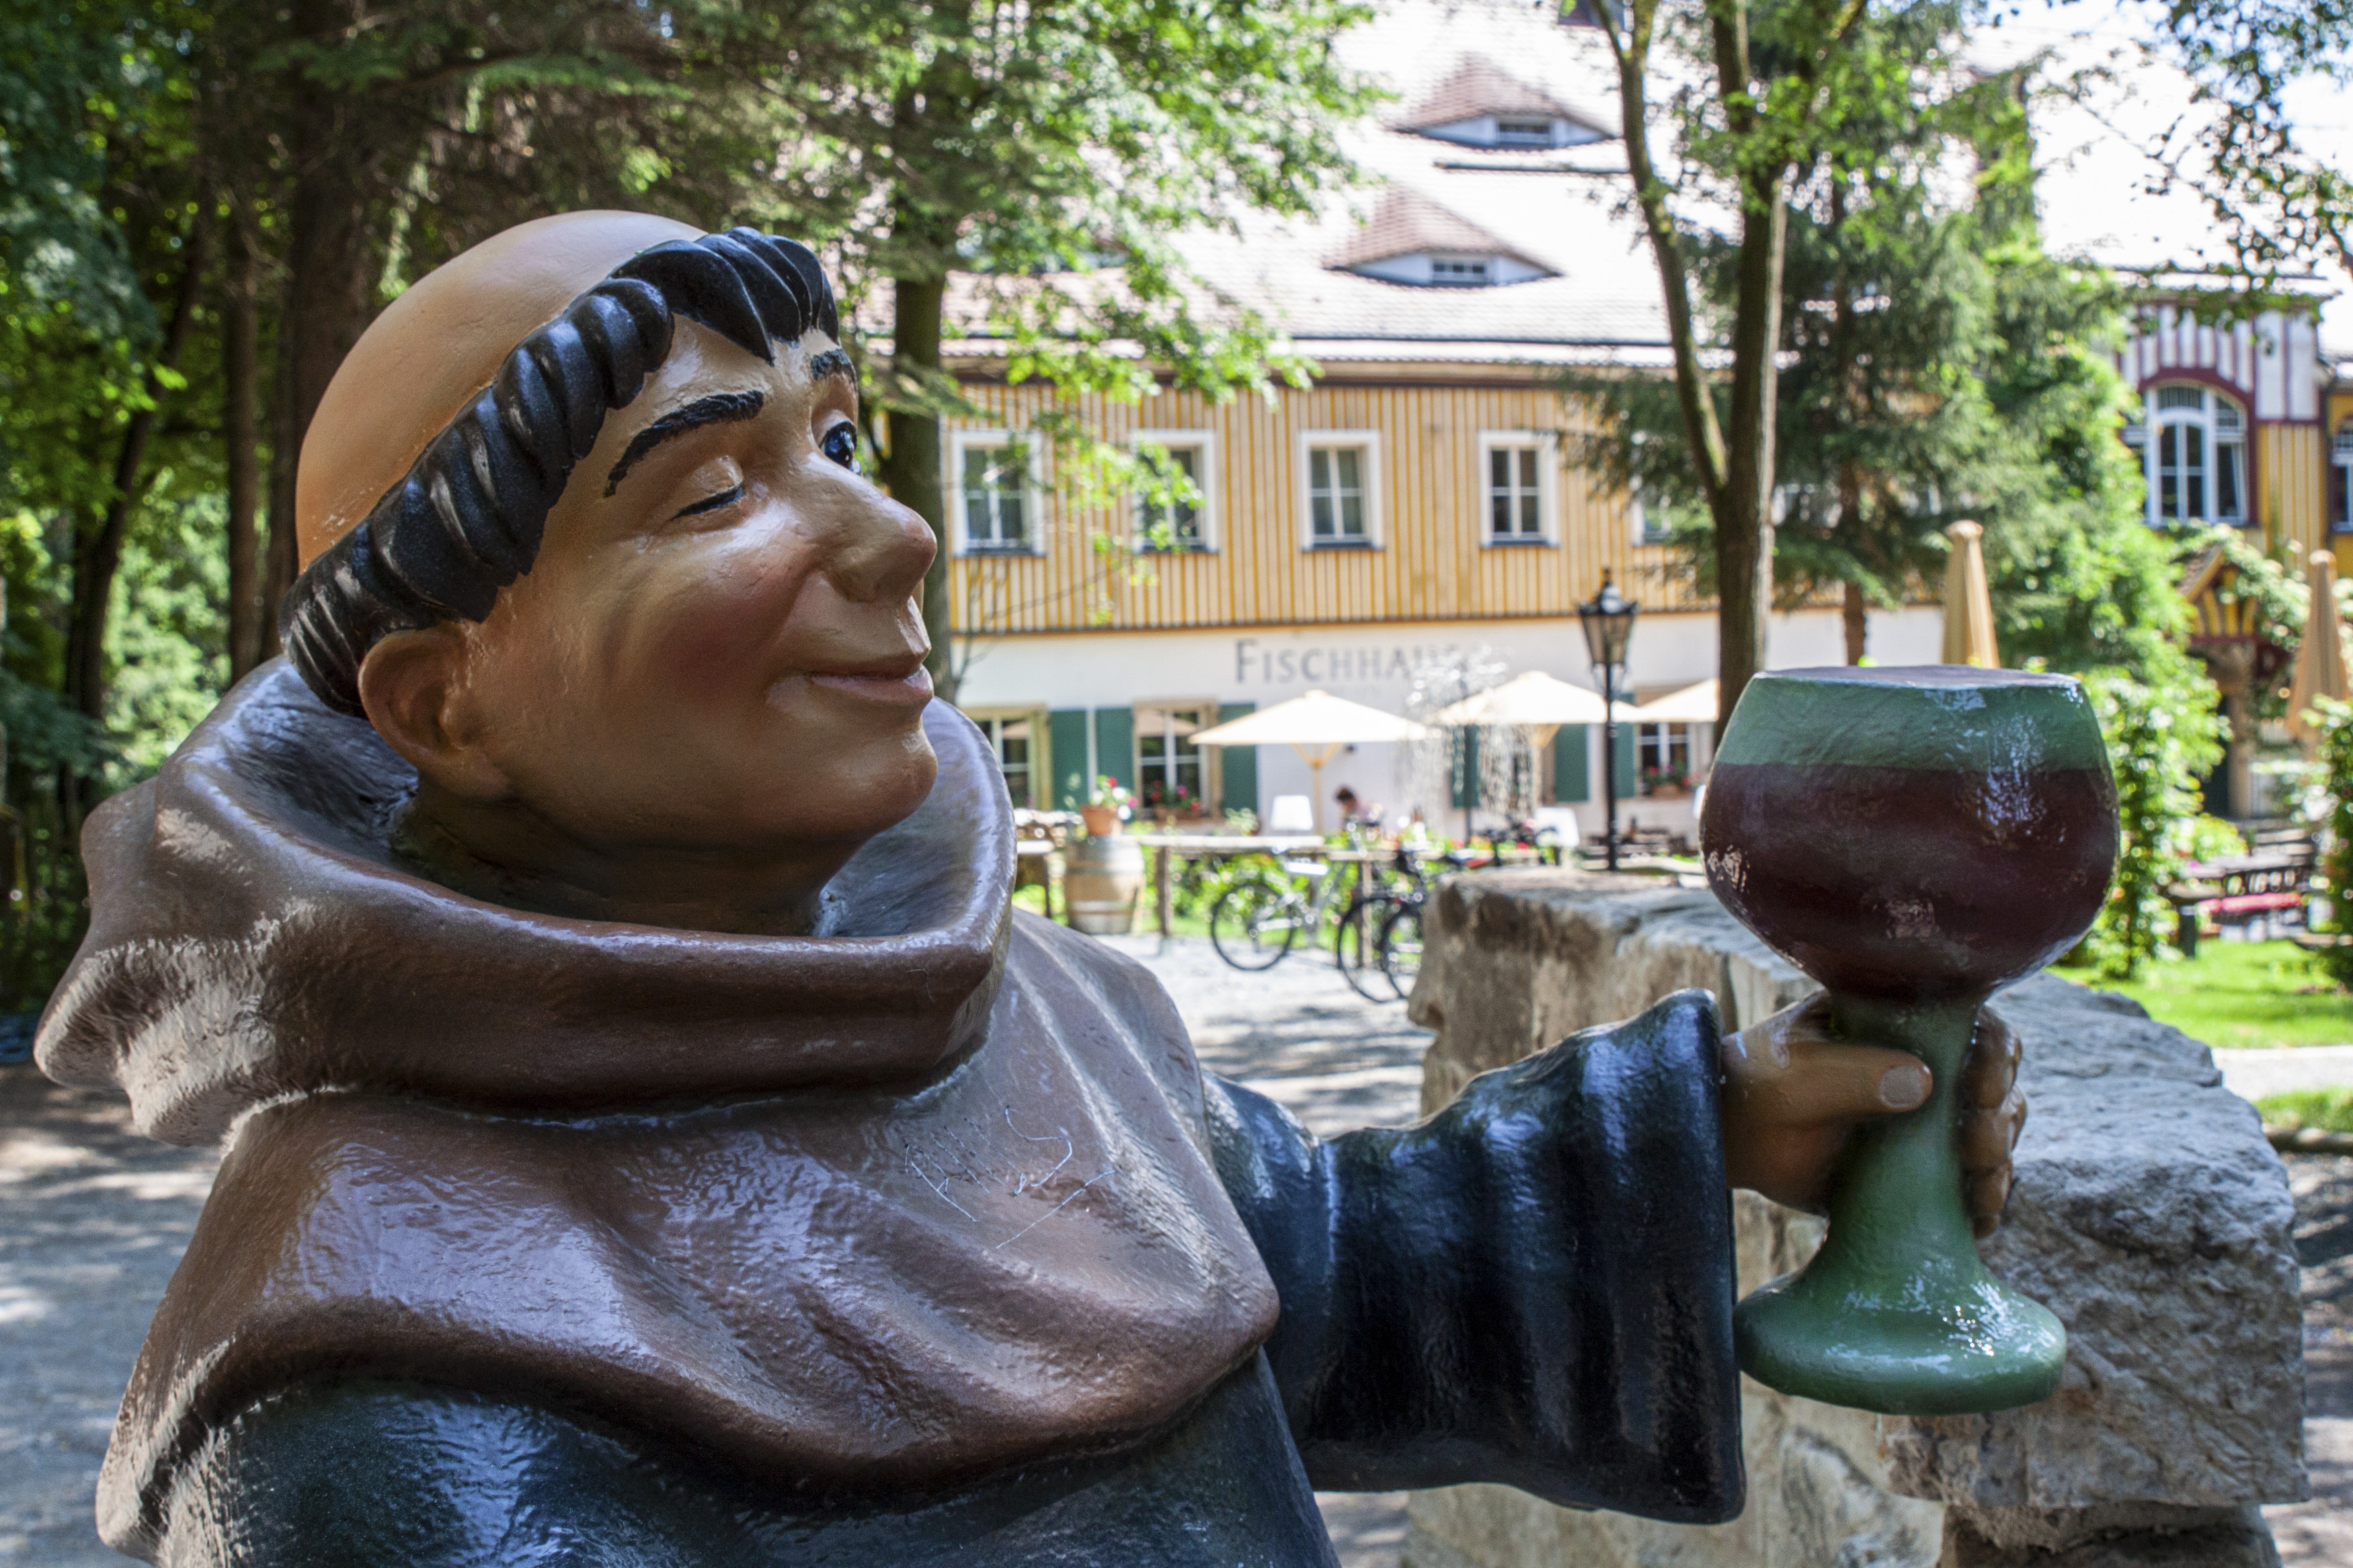 A monk welcomes the guests in the historic Fischhaus in Dresden